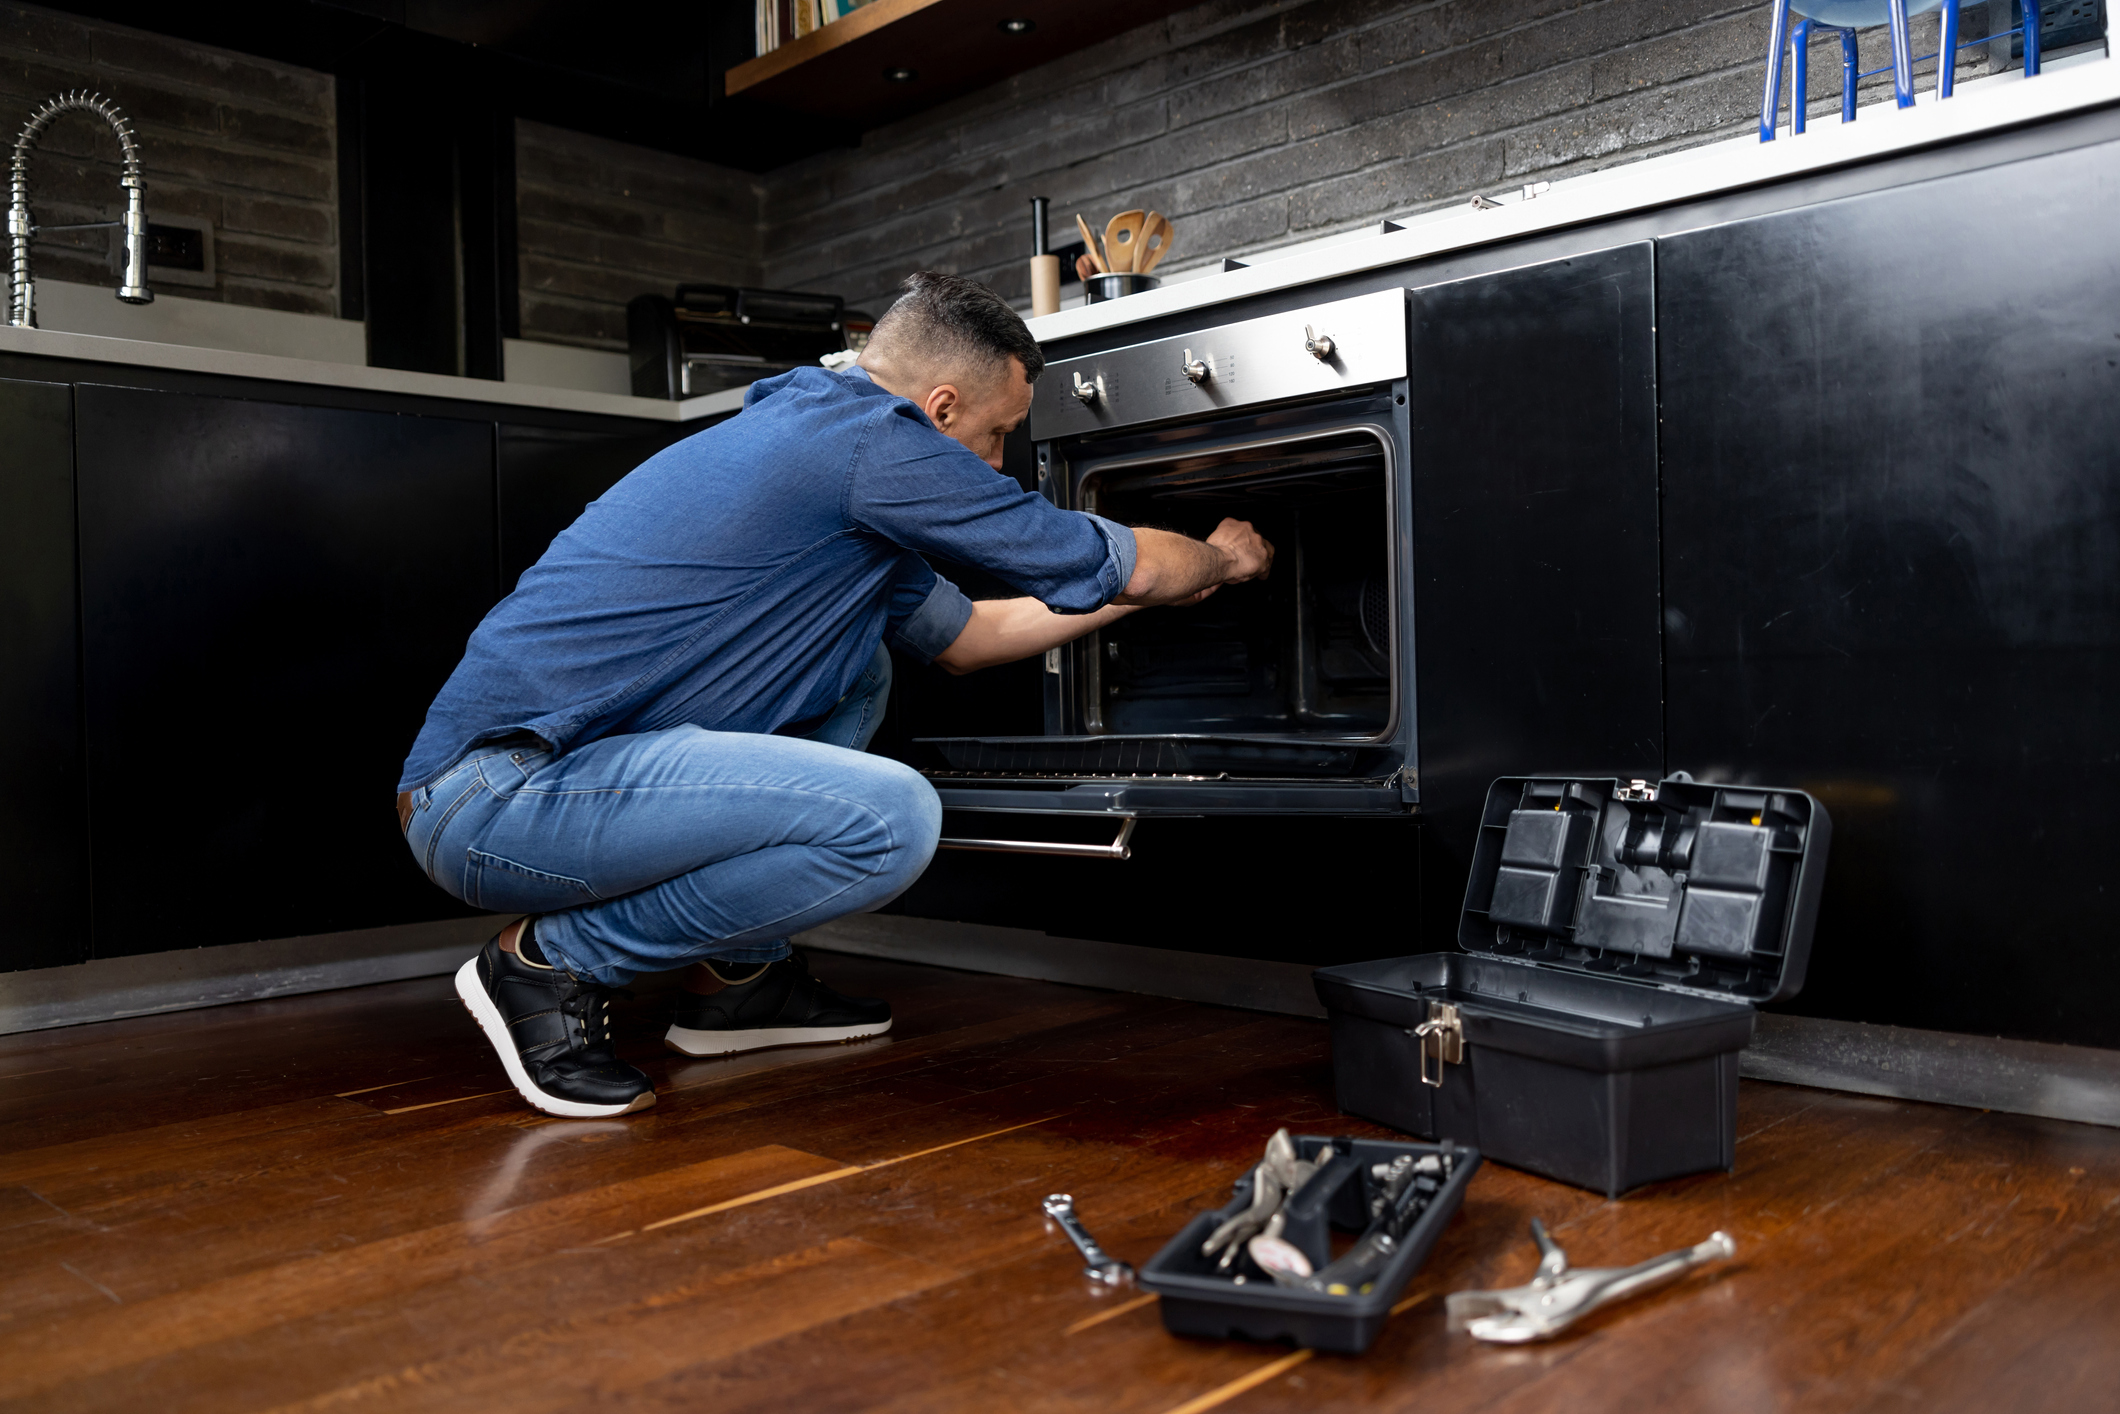 Lg Washer Dryer Repair Near Me Dependable Refrigeration & Appliance Repair Service